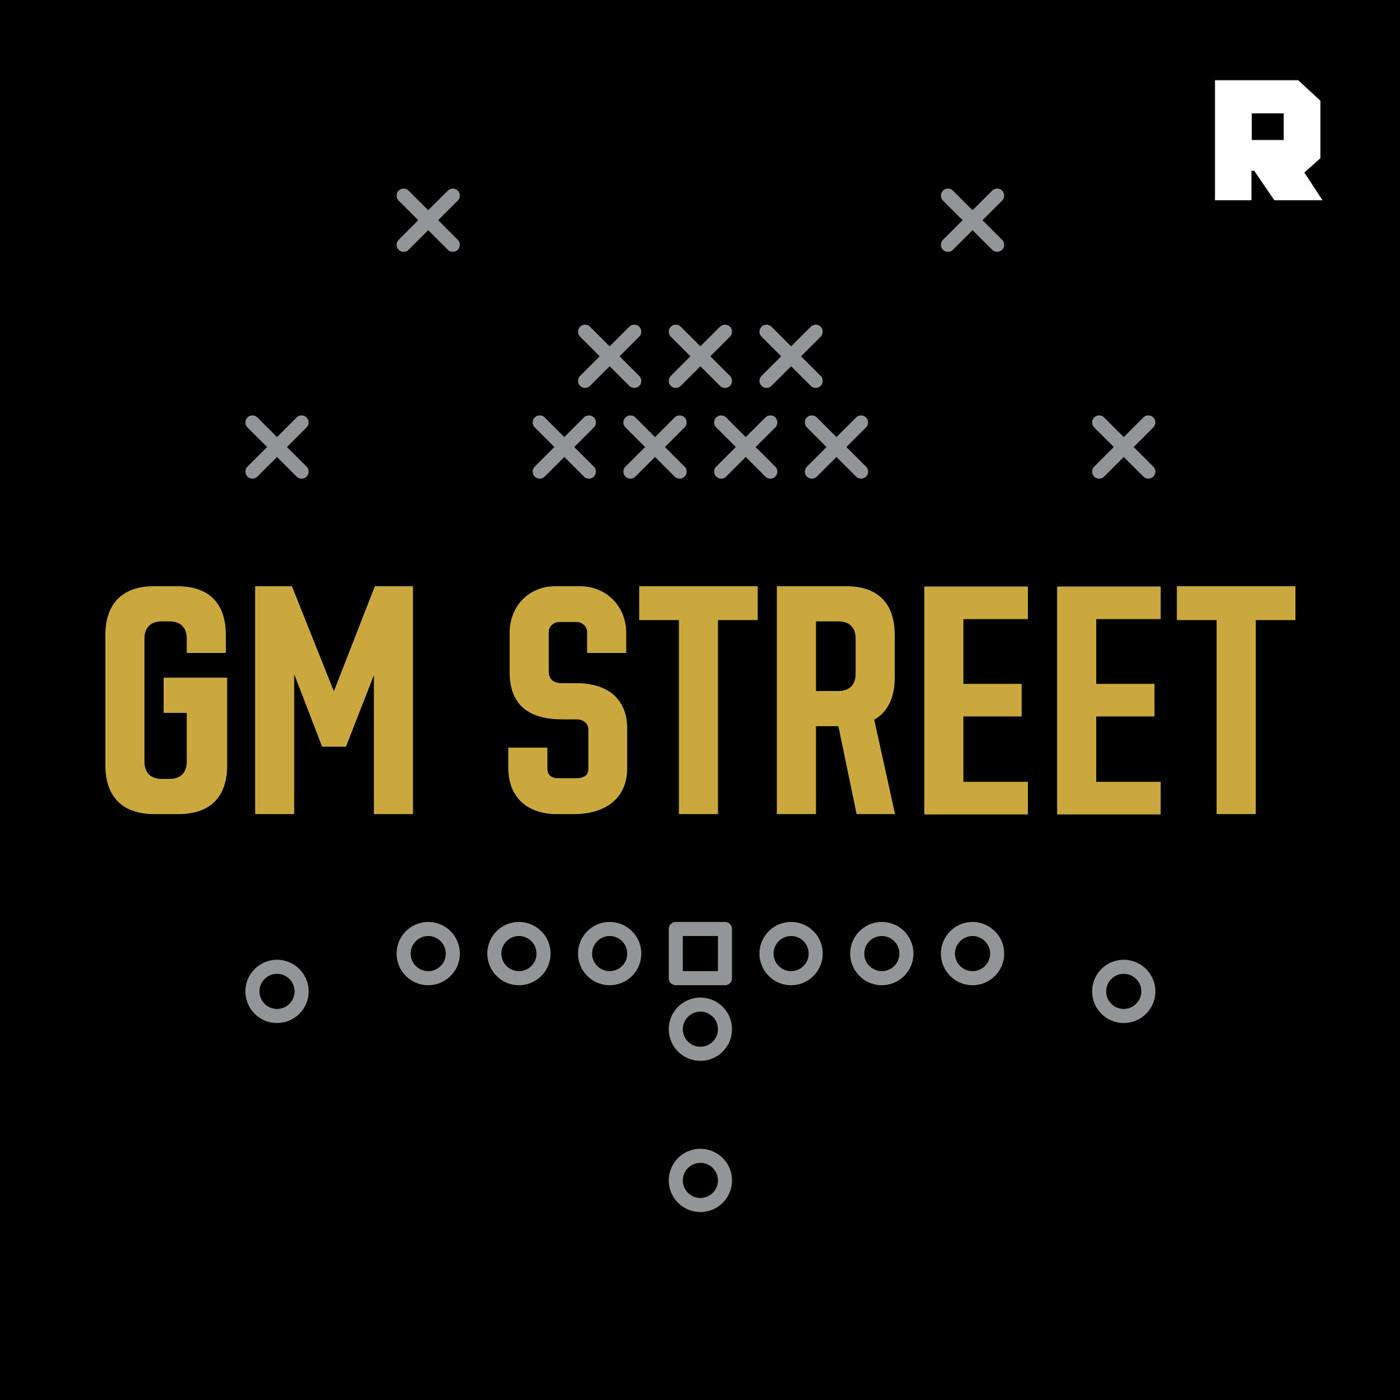 The Baker Mayfield Rumor, Tom Brady’s Next Deal, and the QB Landscape | GM Street (Ep. 263)